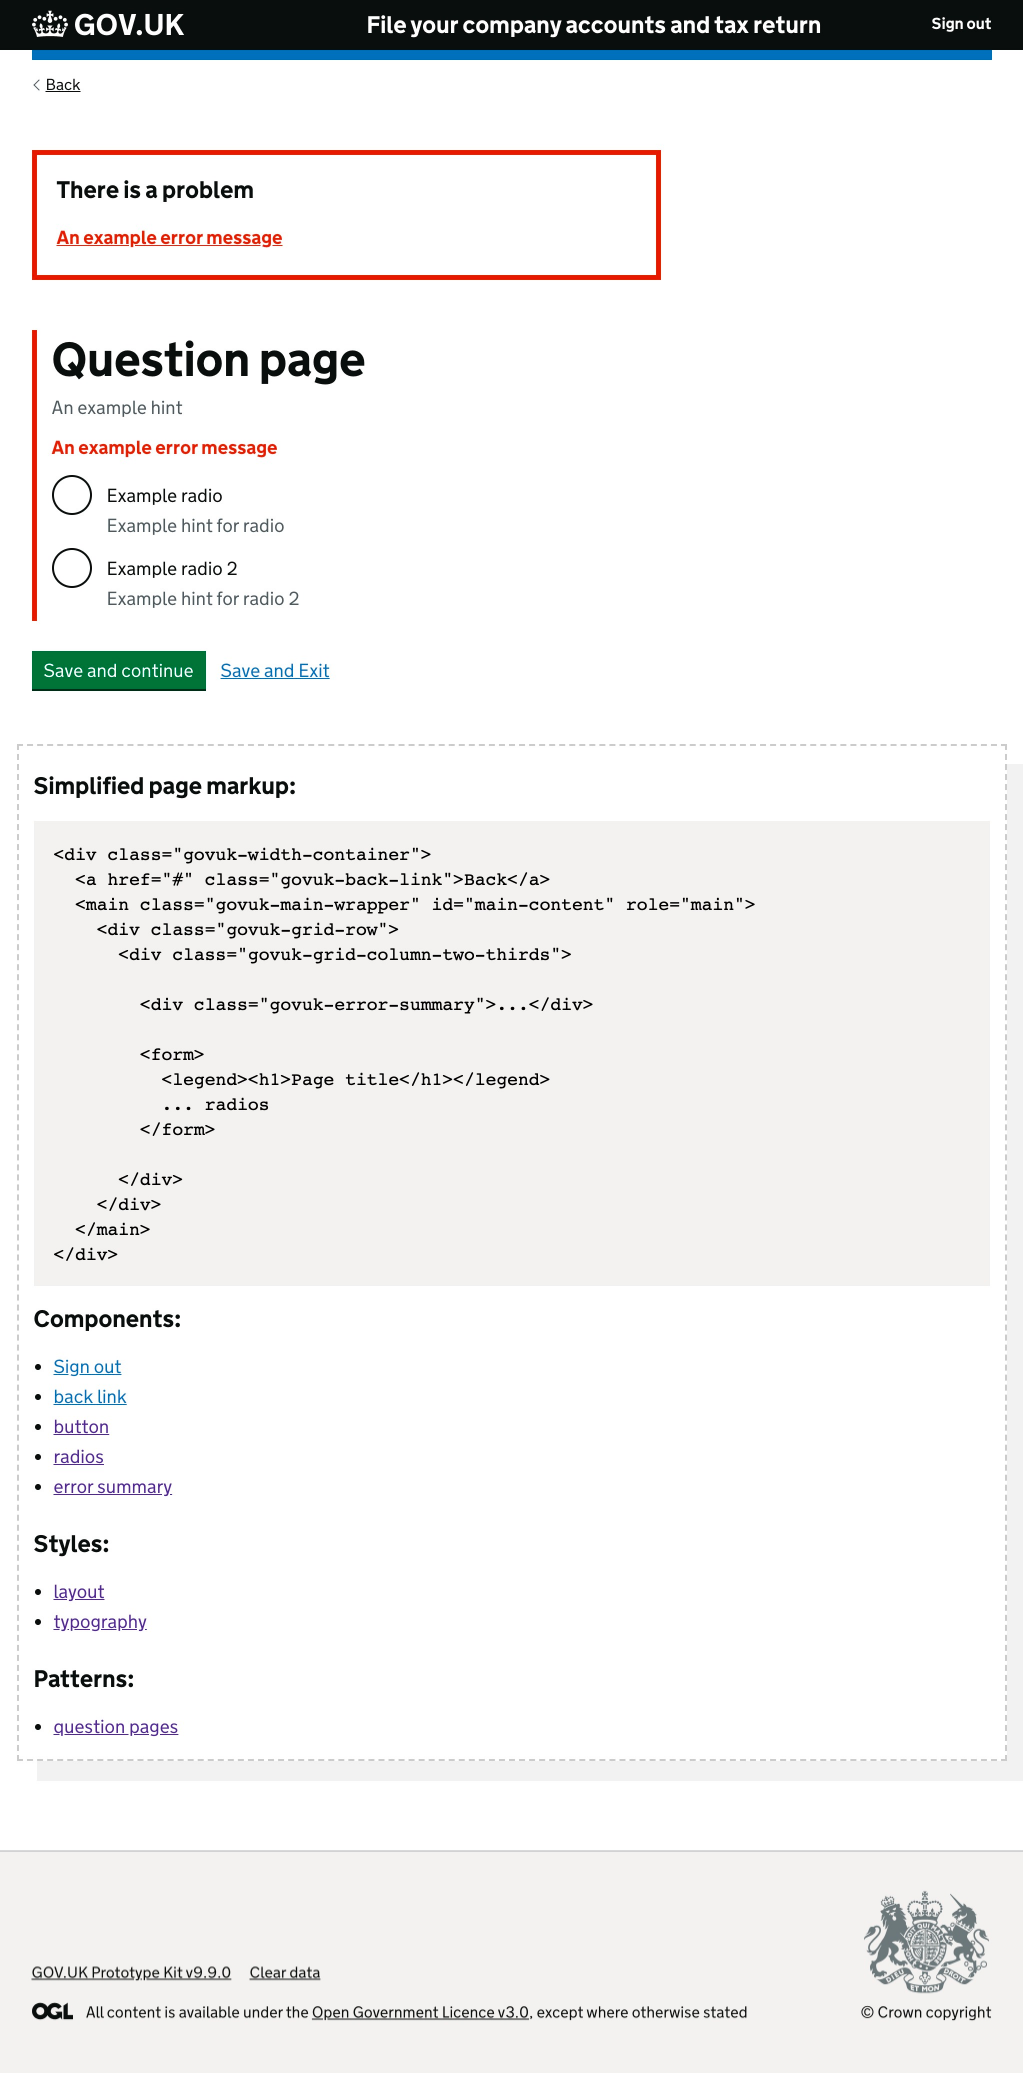 A screenshot of a page detailing the HTML markup for a question page